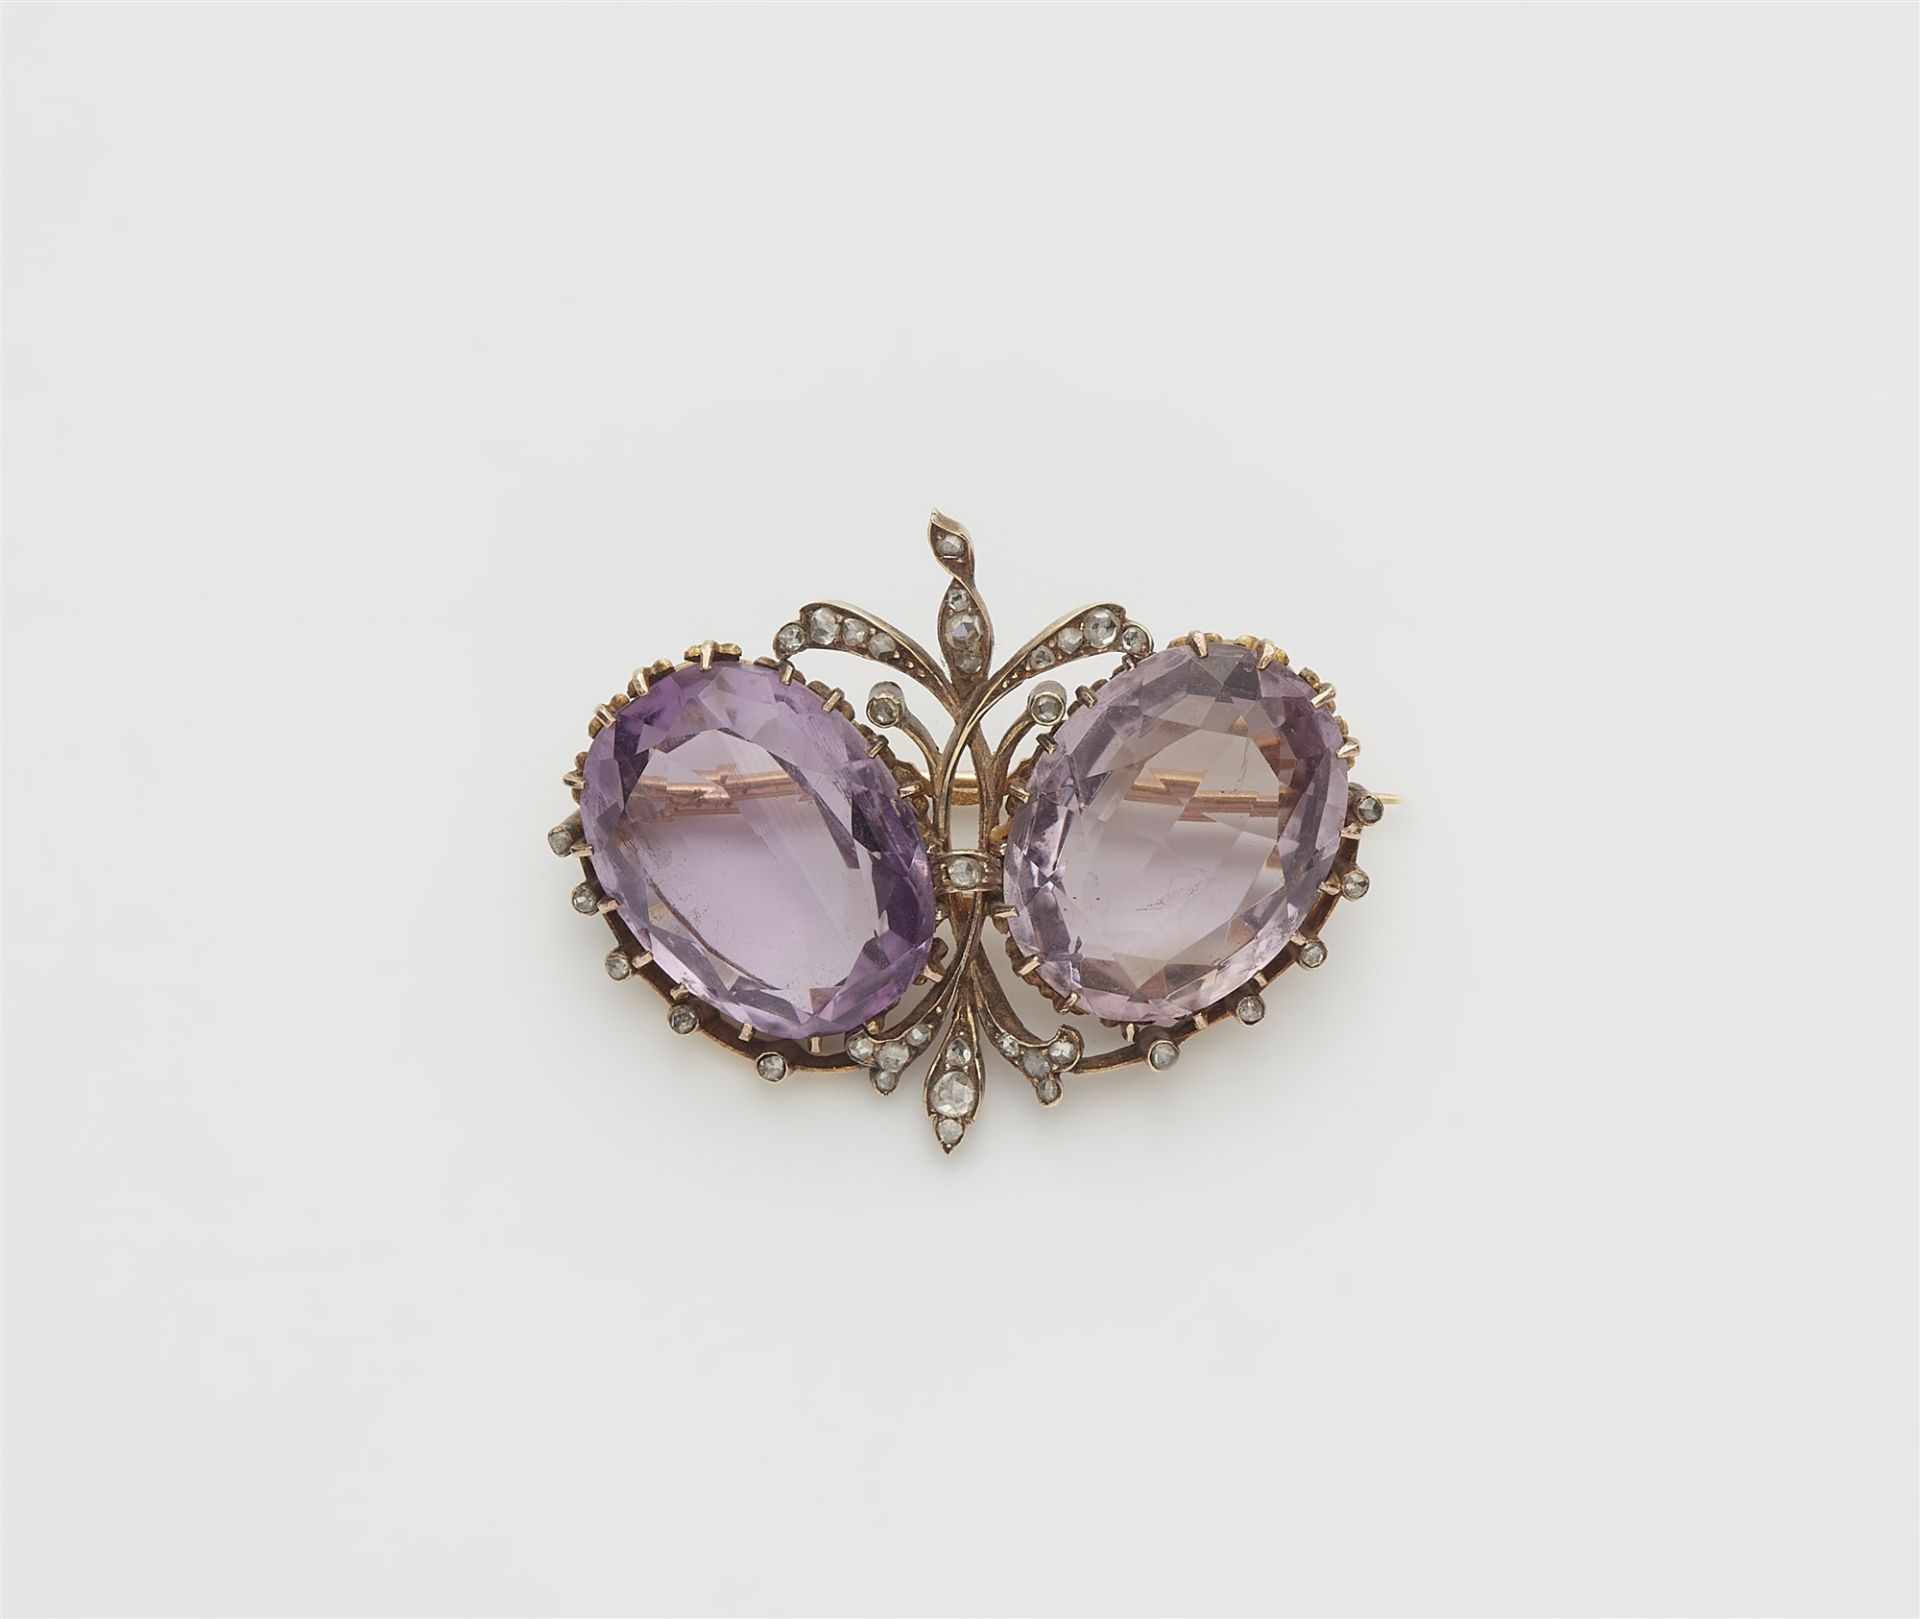 A late 19th century 14k gold, diamond and amethyst brooch.